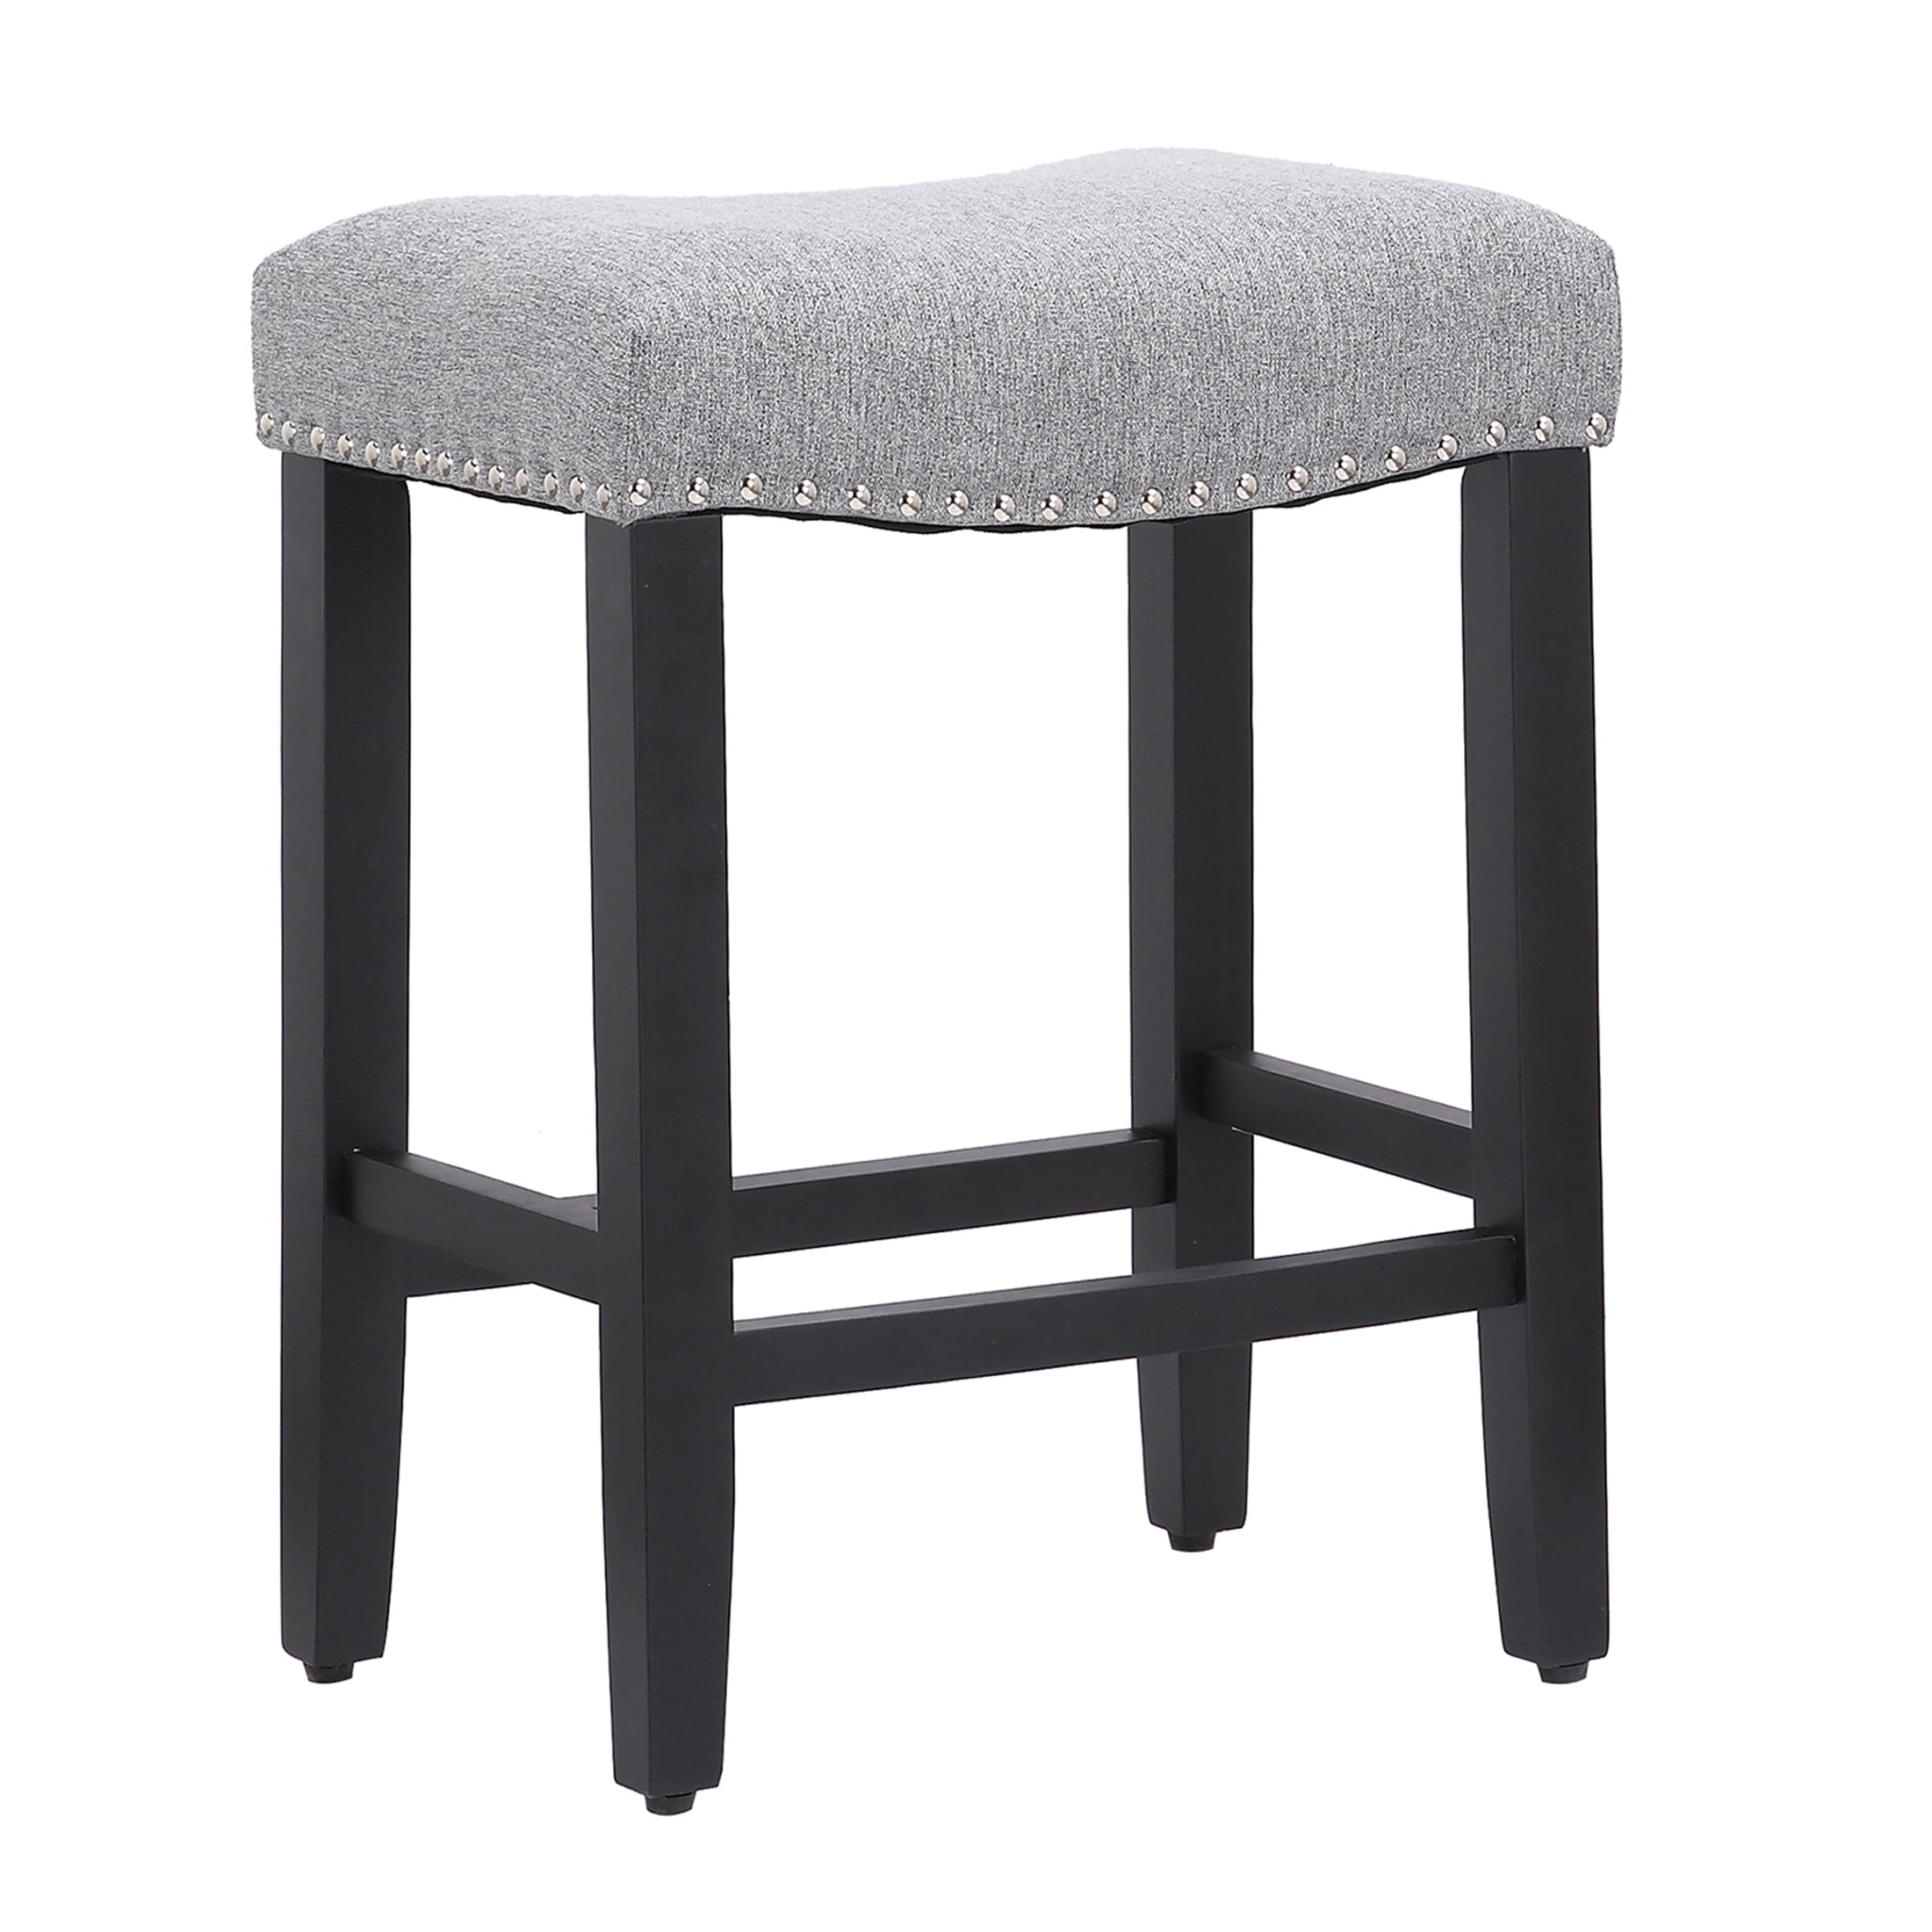 WestinTrends 24 Inch Counter Height Stools for Kitchen Counter